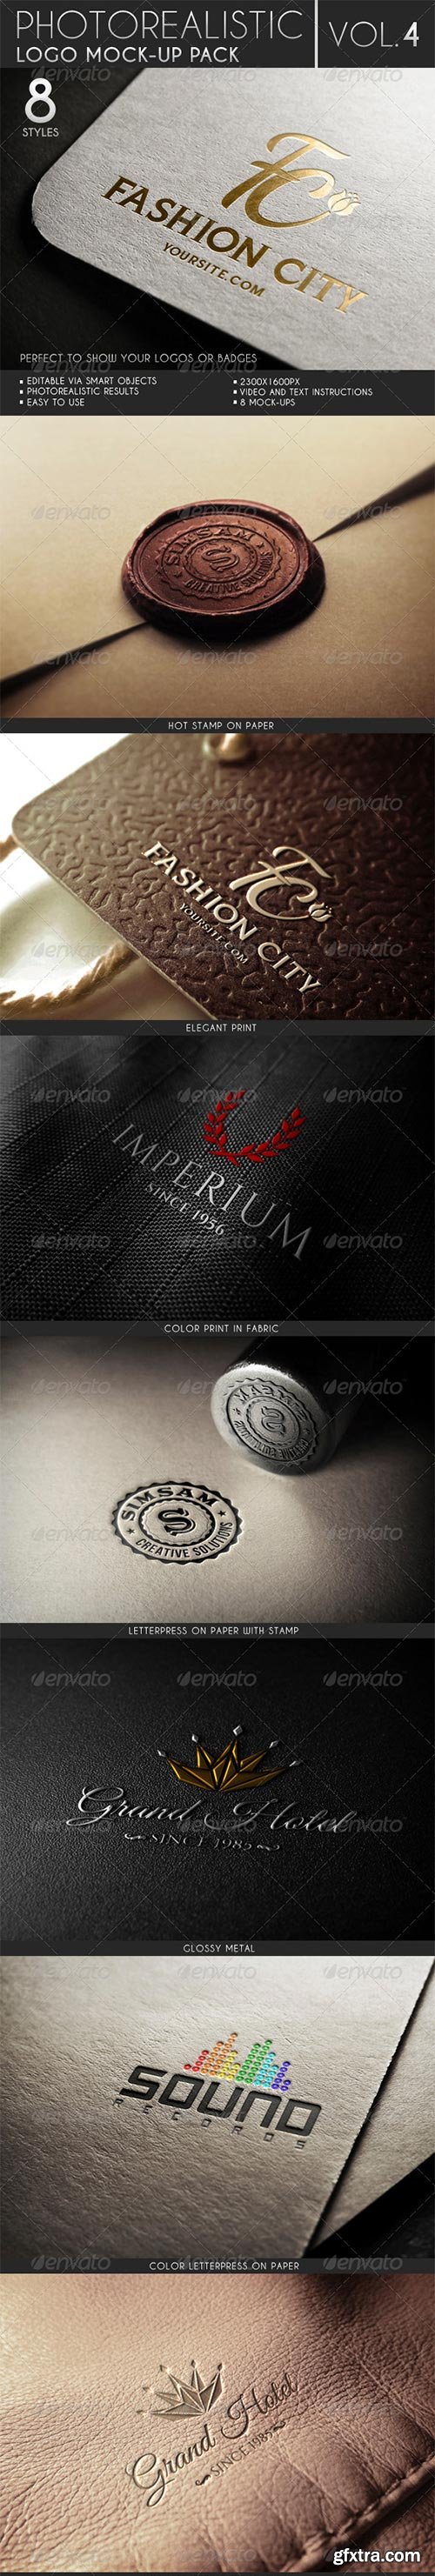 GraphicRiver - Photorealistic Logo Mock-Up Pack Vol.4